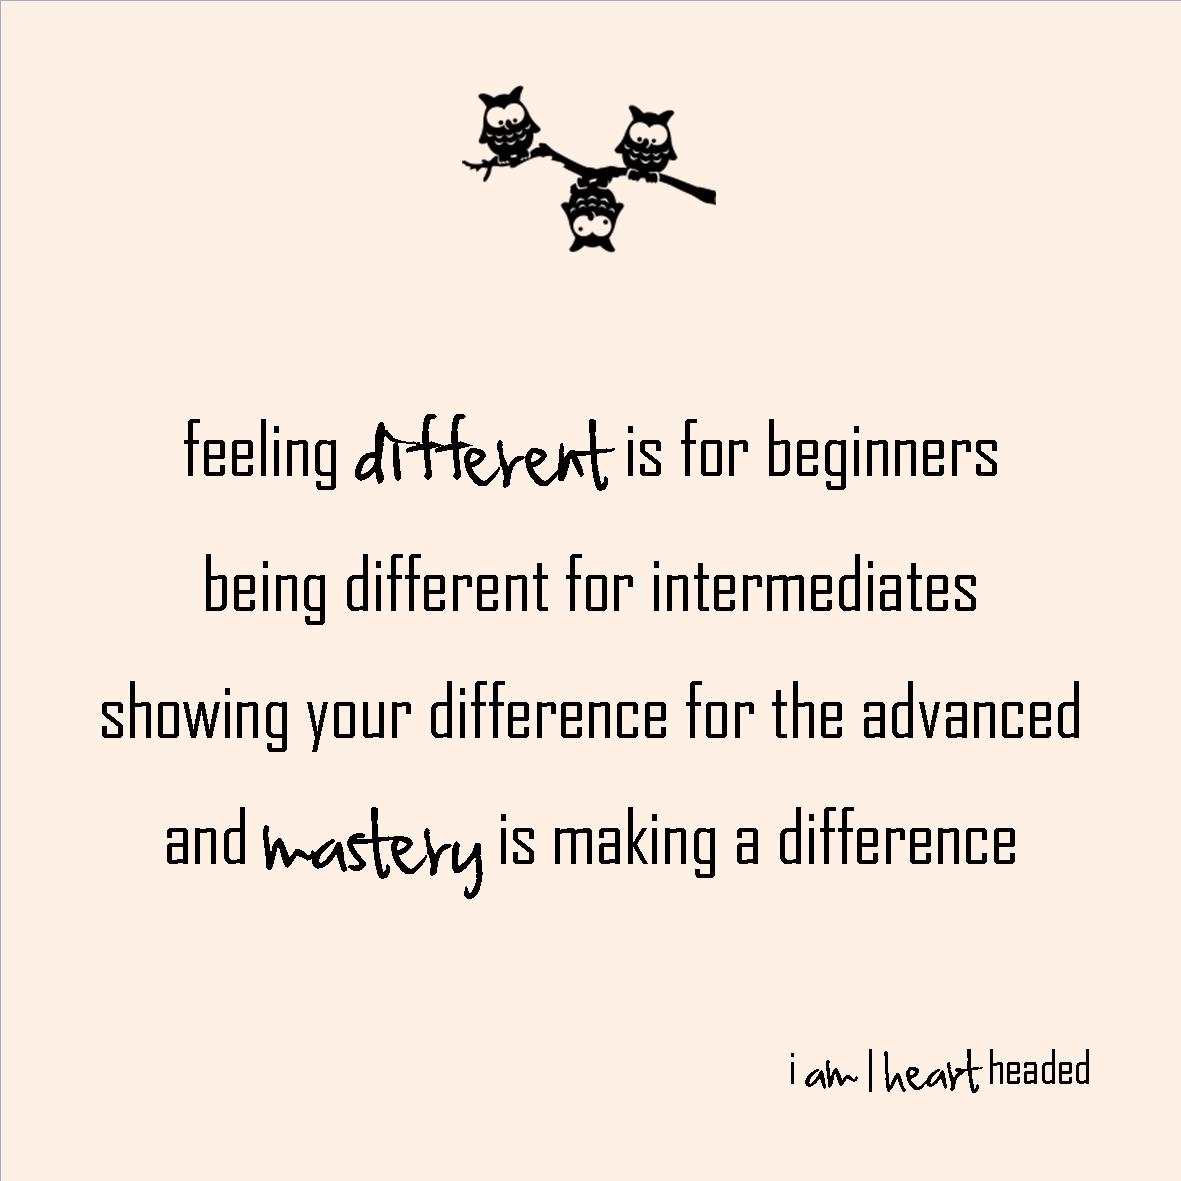 full-size featured image of quote 'making a difference' in category 'wacky' at i am | heart headed